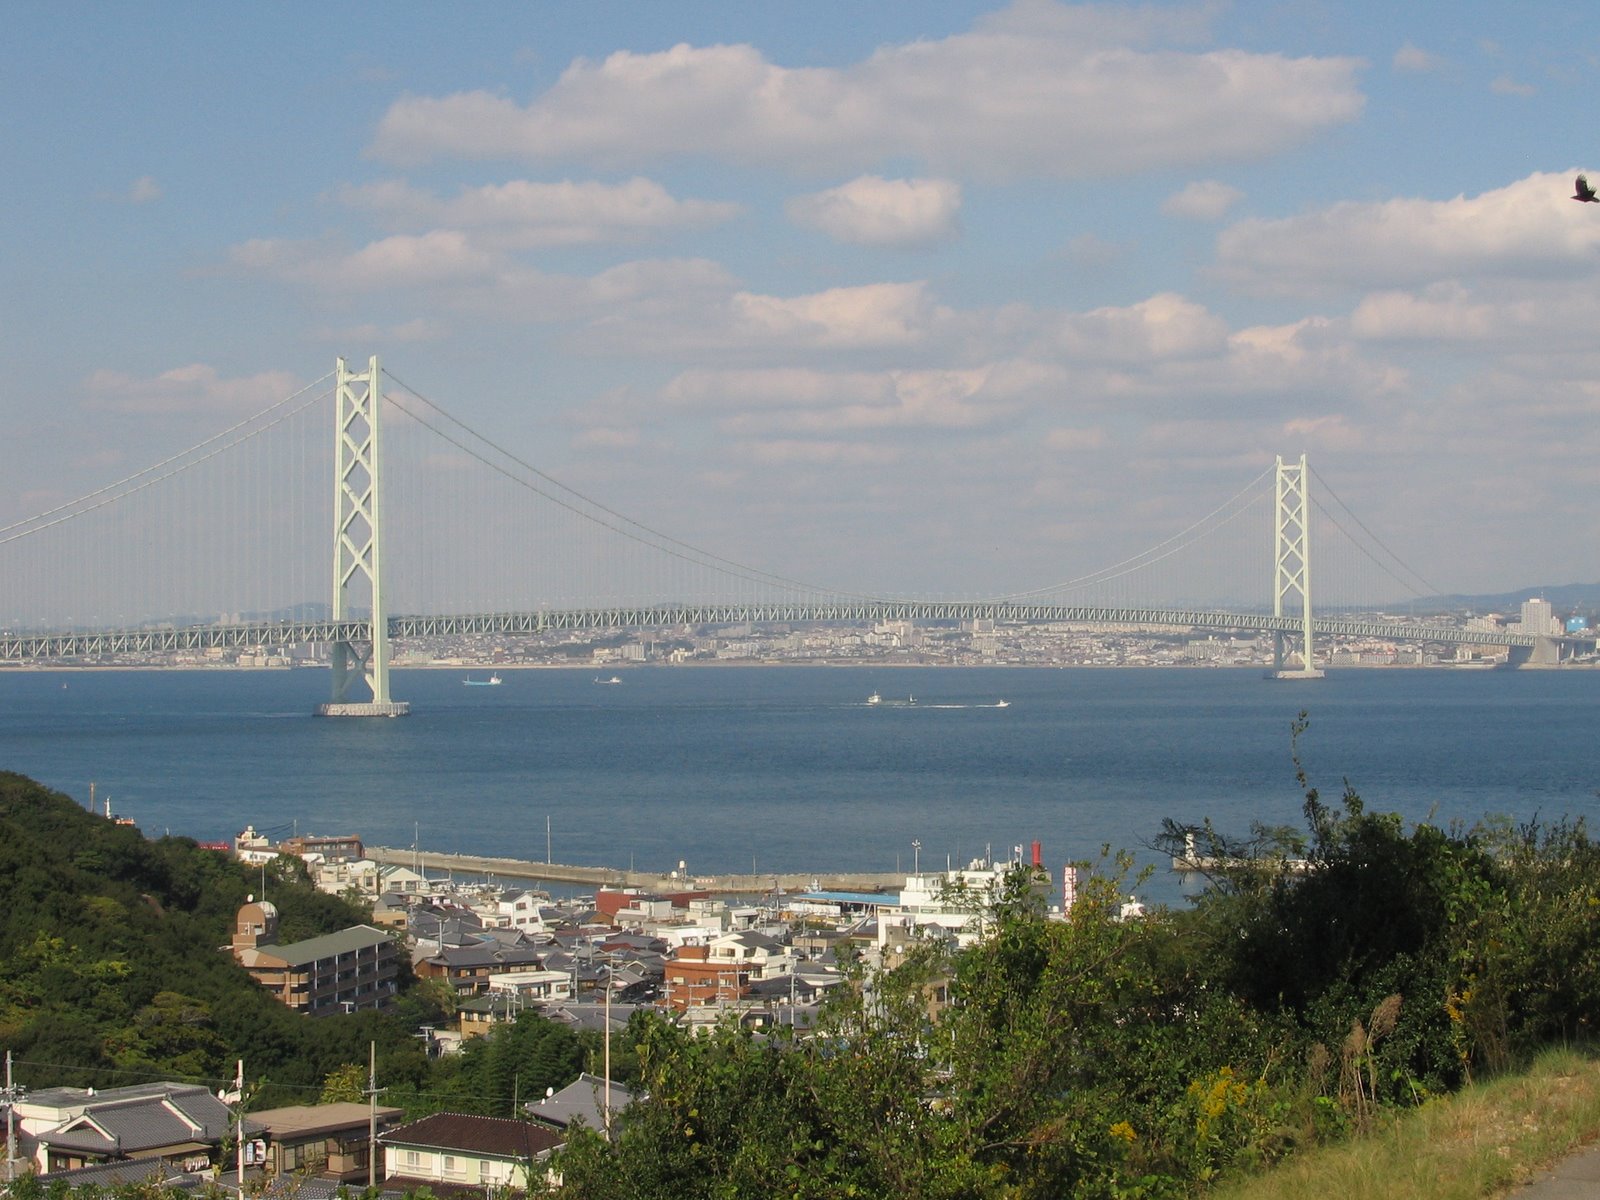 where is the longest suspension bridge in the world and how long is the akashi kaikyo bridge in japan